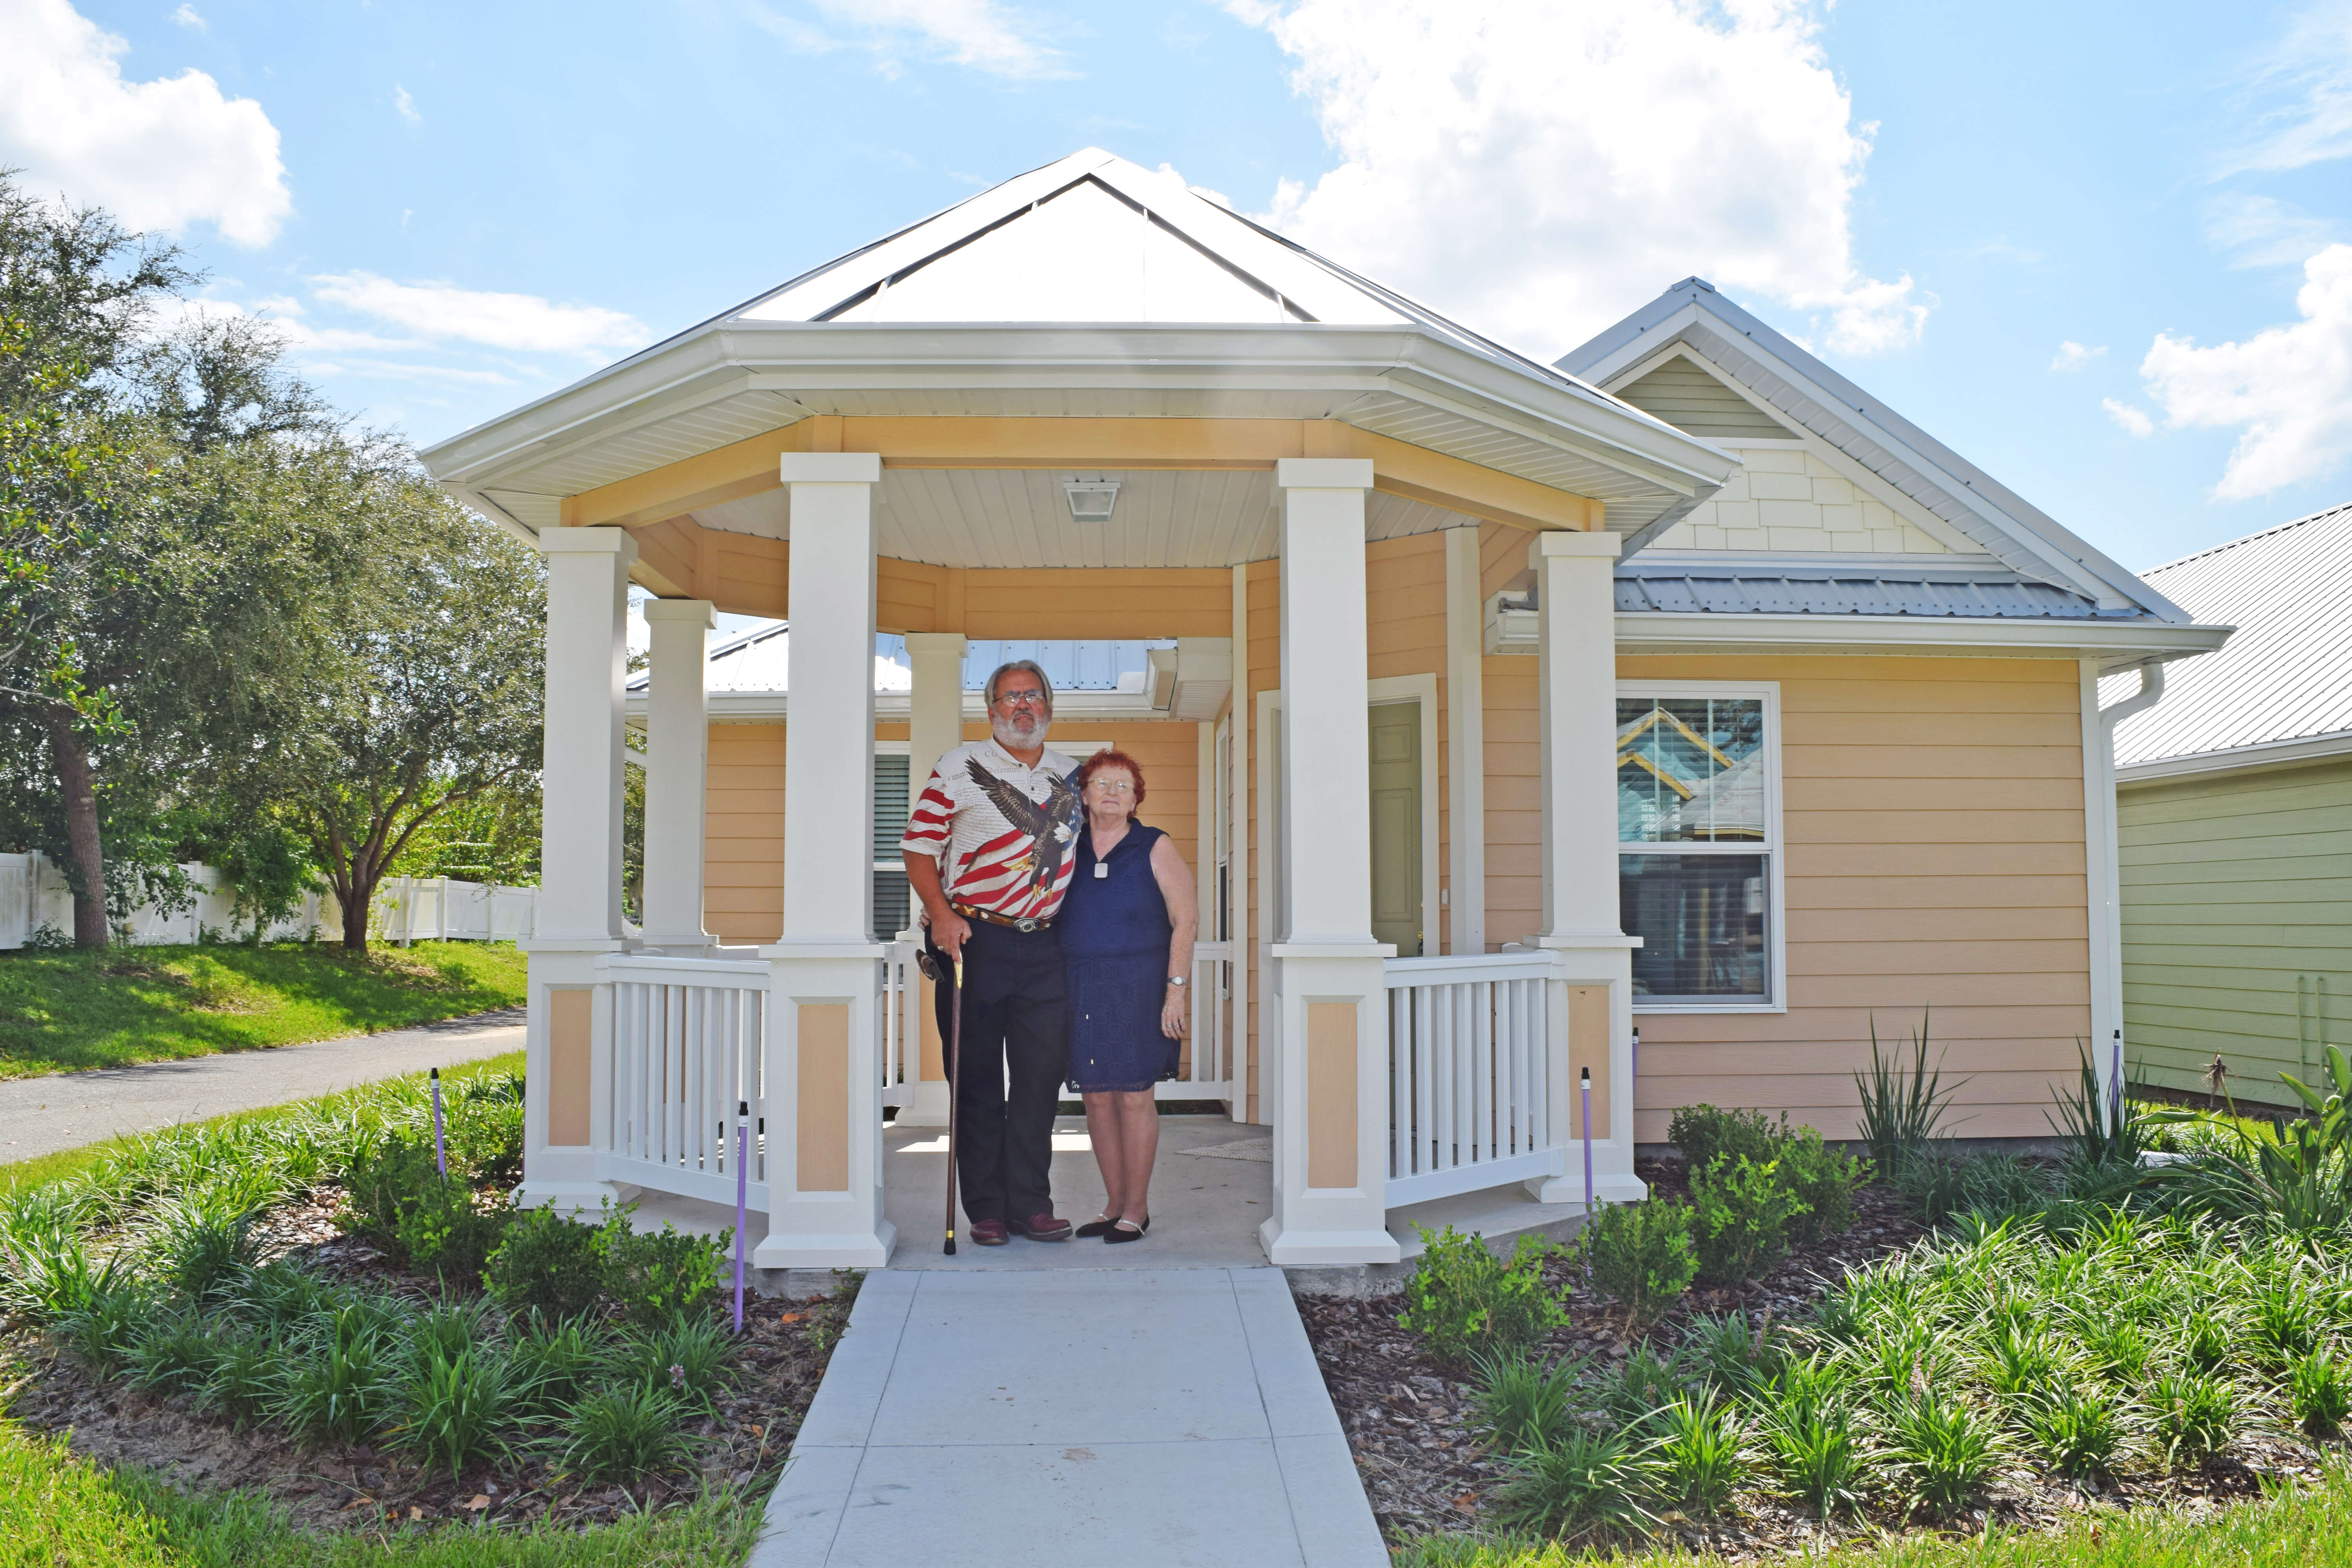 New homeowners in the Veterans Village